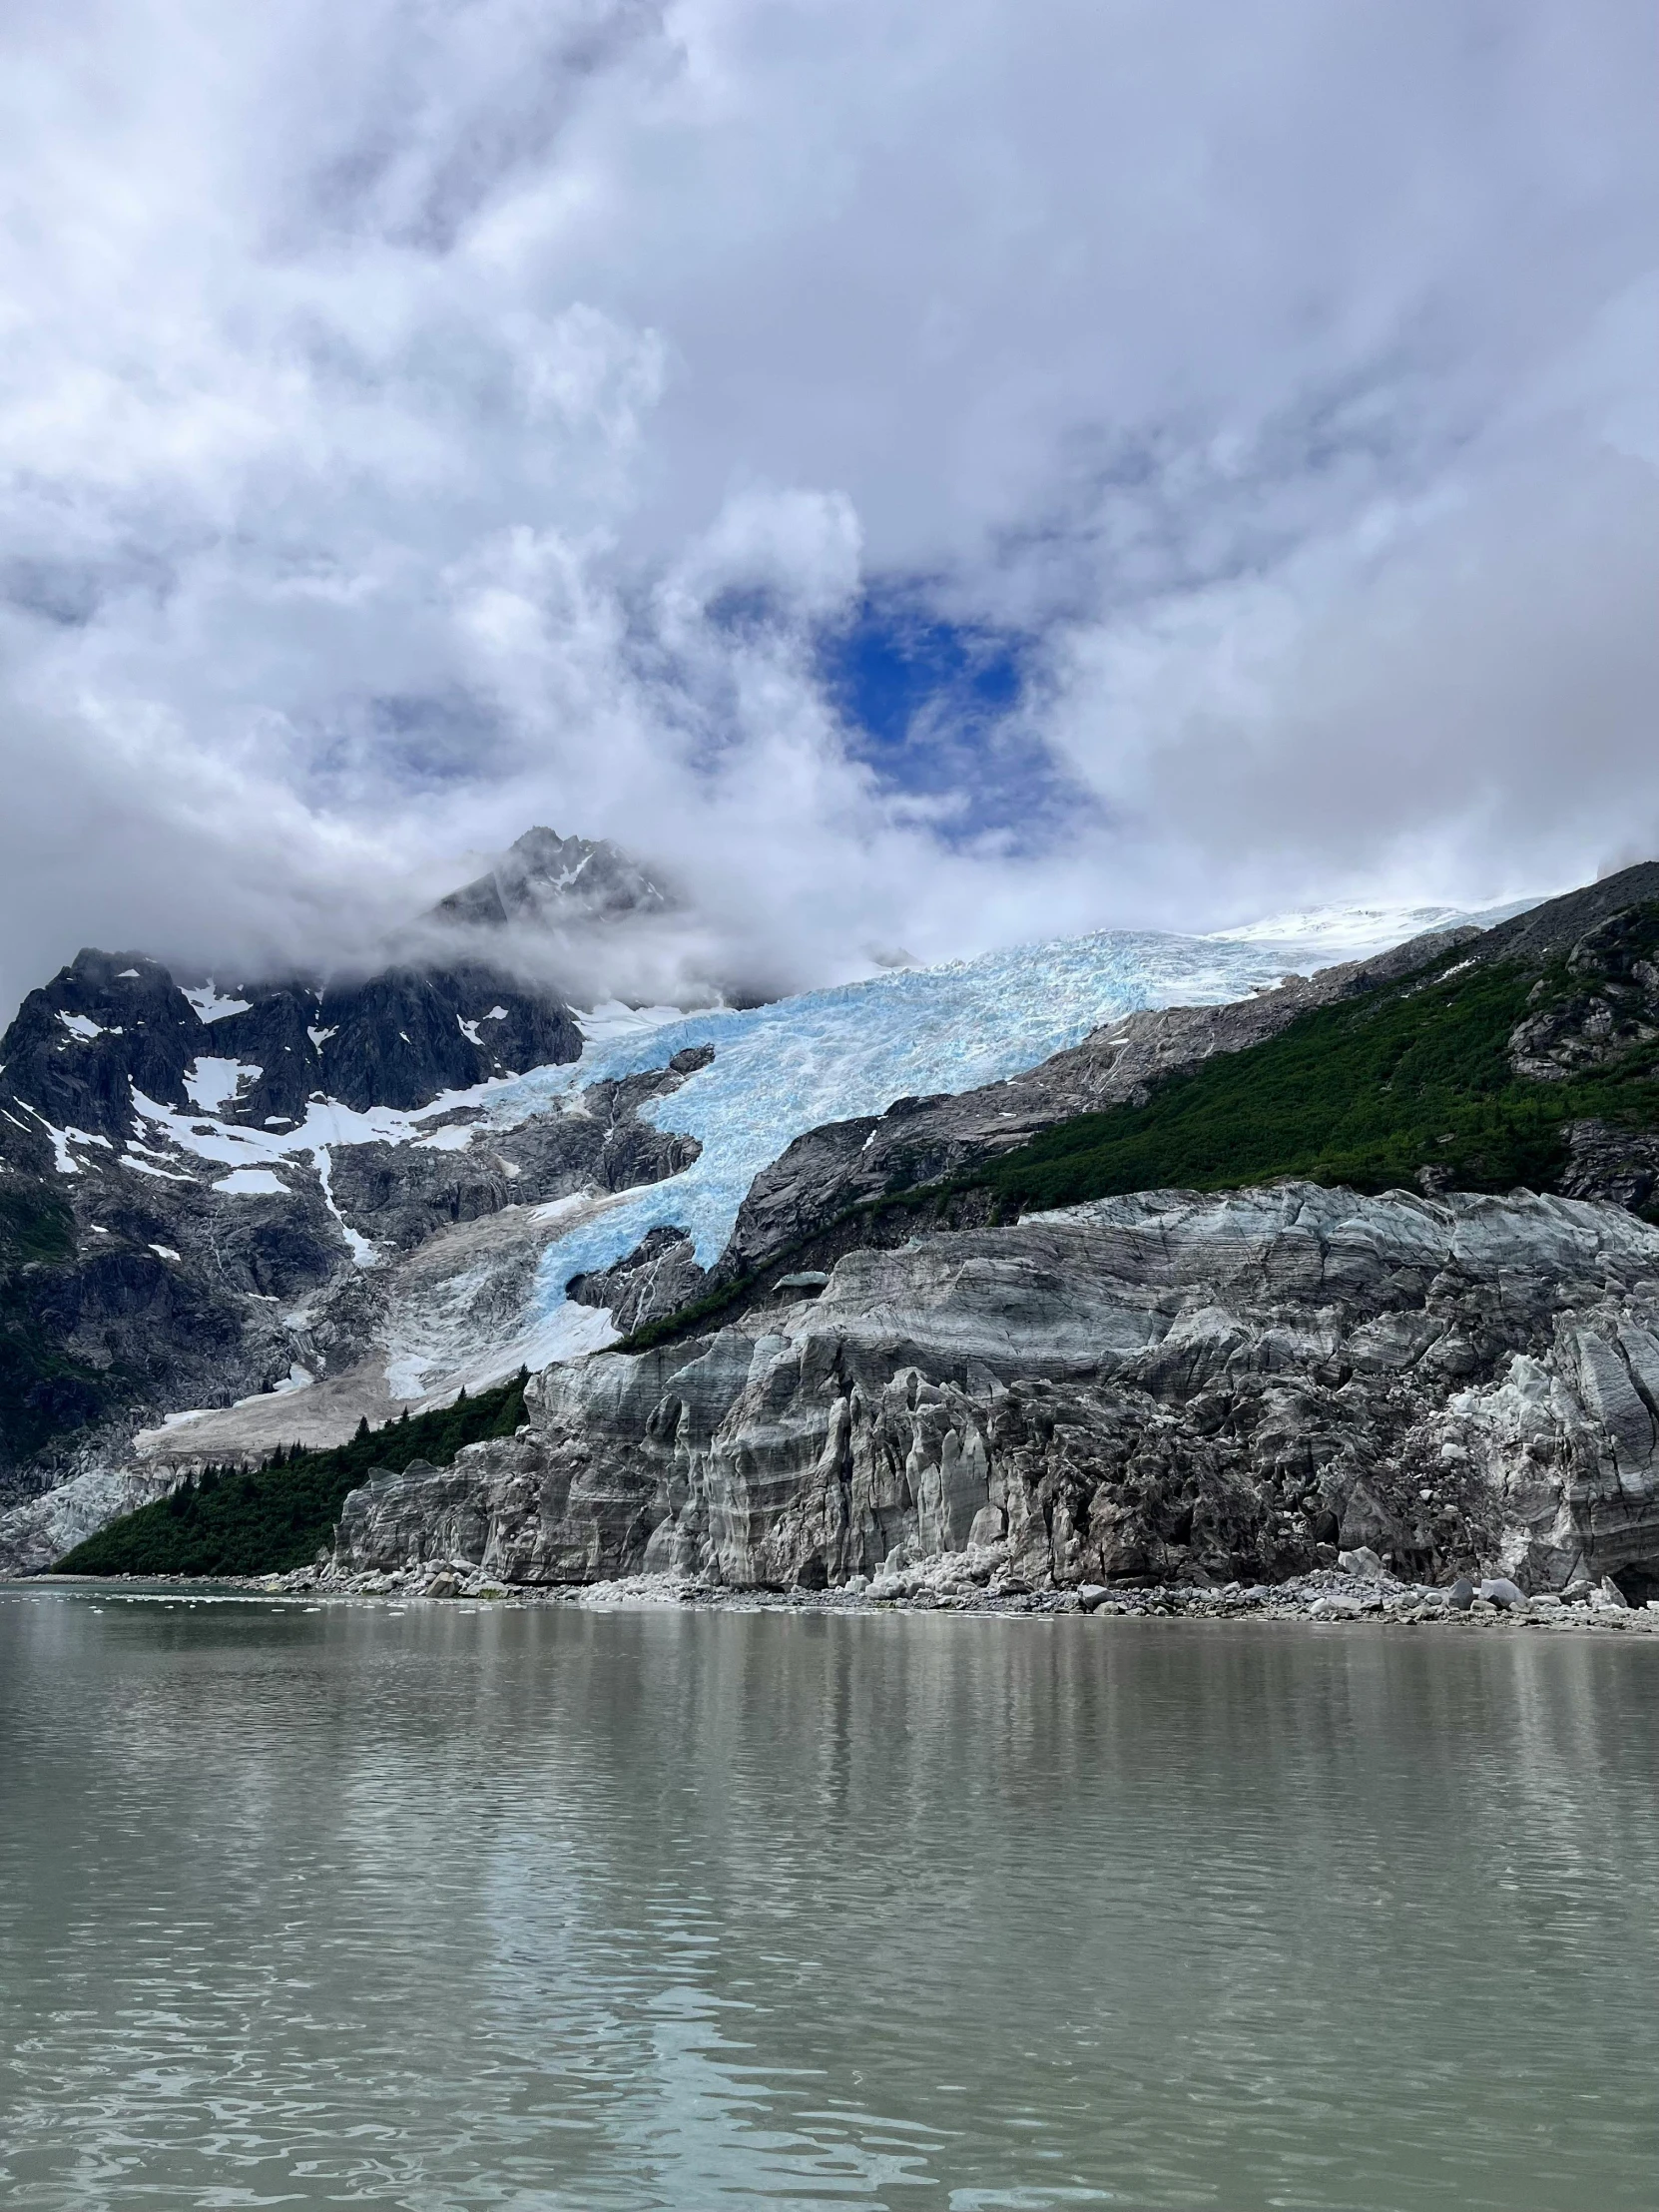 mountains and glaciers near water with cloudy sky